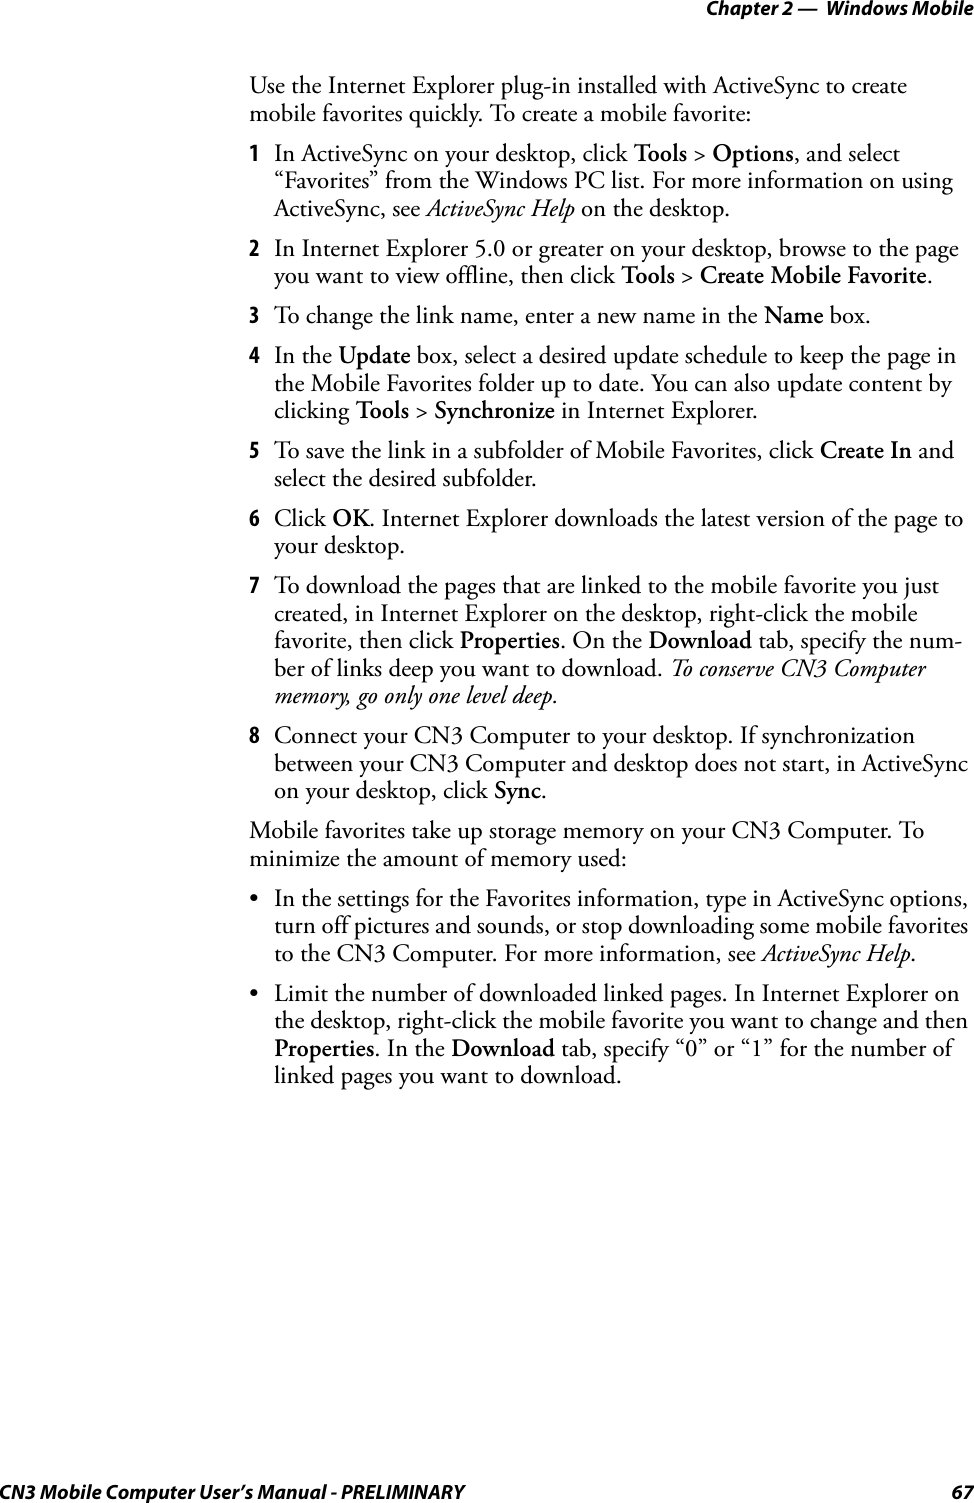 Chapter 2 —  Windows MobileCN3 Mobile Computer User’s Manual - PRELIMINARY 67Use the Internet Explorer plug-in installed with ActiveSync to create mobile favorites quickly. To create a mobile favorite:1In ActiveSync on your desktop, click To o l s  &gt; Options, and select “Favorites” from the Windows PC list. For more information on using ActiveSync, see ActiveSync Help on the desktop.2In Internet Explorer 5.0 or greater on your desktop, browse to the page you want to view offline, then click Tools &gt; Create Mobile Favorite.3To change the link name, enter a new name in the Name box.4In the Update box, select a desired update schedule to keep the page in the Mobile Favorites folder up to date. You can also update content by clicking Tools &gt; Synchronize in Internet Explorer.5To save the link in a subfolder of Mobile Favorites, click Create In and select the desired subfolder.6Click OK. Internet Explorer downloads the latest version of the page to your desktop.7To download the pages that are linked to the mobile favorite you just created, in Internet Explorer on the desktop, right-click the mobile favorite, then click Properties. On the Download tab, specify the num-ber of links deep you want to download. To conserve CN3 Computer memory, go only one level deep.8Connect your CN3 Computer to your desktop. If synchronization between your CN3 Computer and desktop does not start, in ActiveSync on your desktop, click Sync.Mobile favorites take up storage memory on your CN3 Computer. To minimize the amount of memory used:• In the settings for the Favorites information, type in ActiveSync options, turn off pictures and sounds, or stop downloading some mobile favorites to the CN3 Computer. For more information, see ActiveSync Help.• Limit the number of downloaded linked pages. In Internet Explorer on the desktop, right-click the mobile favorite you want to change and then Properties. In the Download tab, specify “0” or “1” for the number of linked pages you want to download.